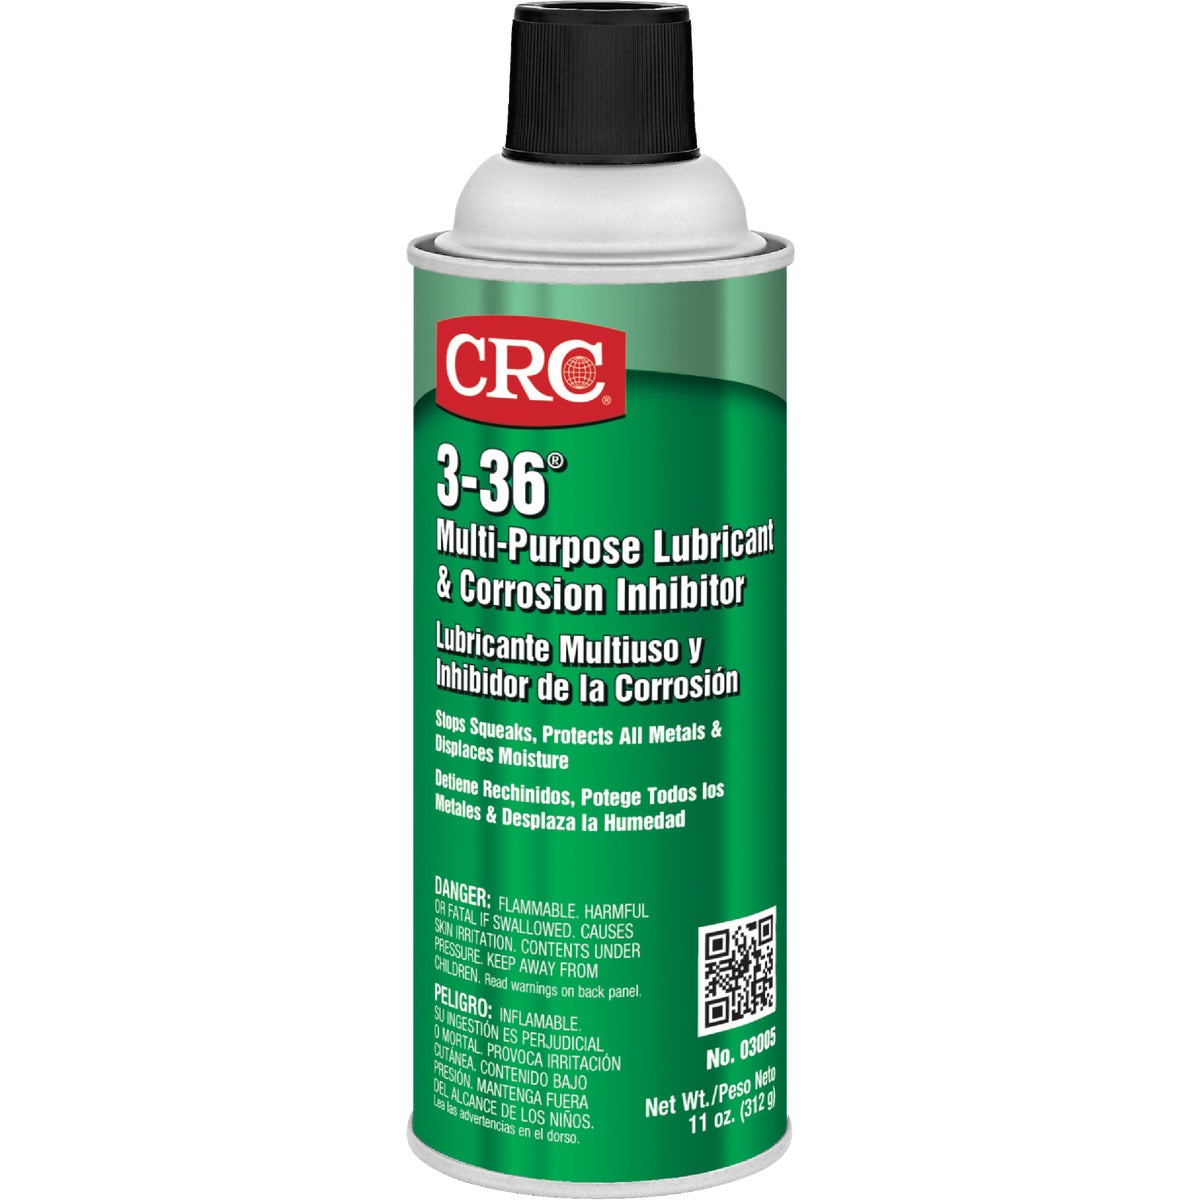 Item 591394, Industrial CRC 3-36 cleans, lubricates, penetrates, and loosens corrosion.